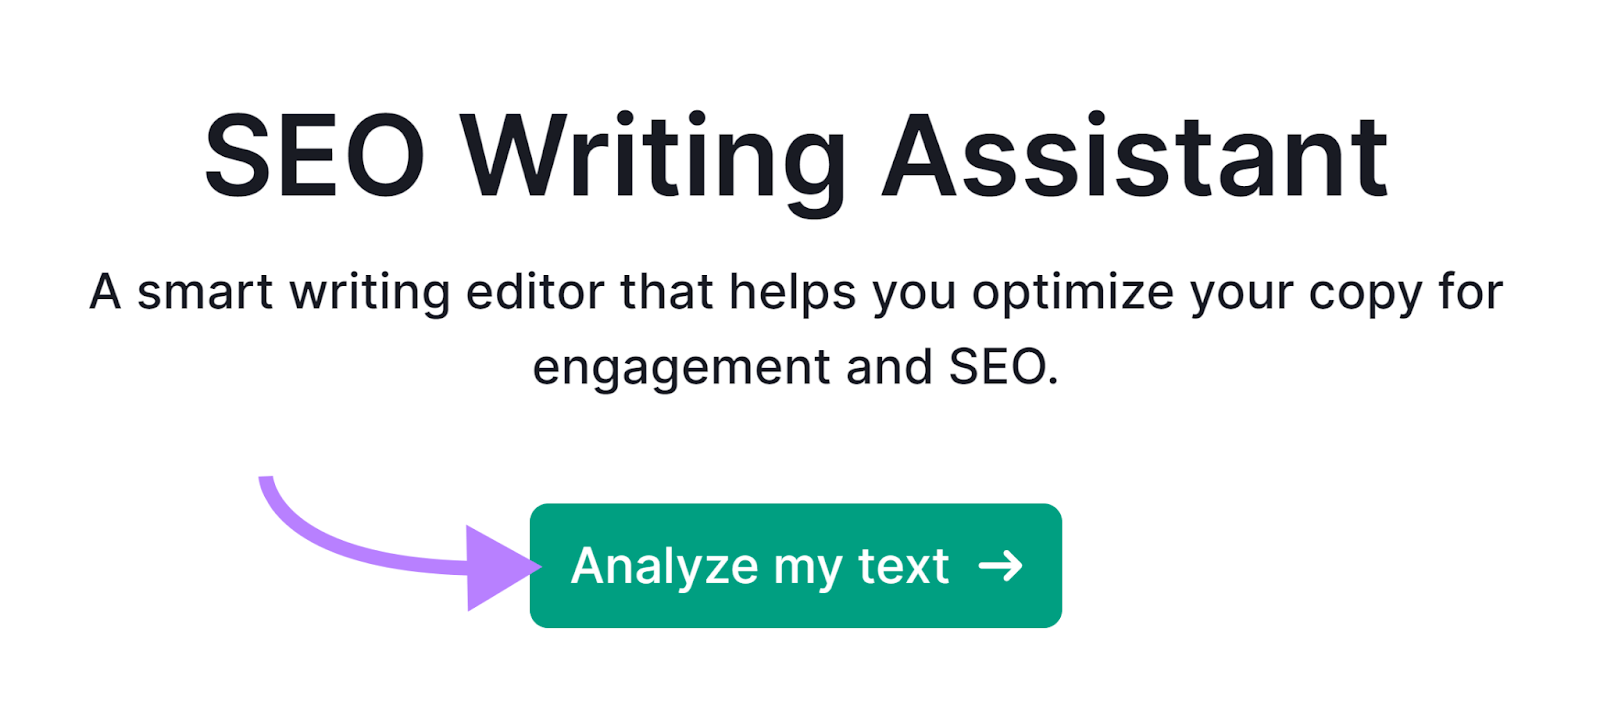 SEO Writing Assistant tool start with arrow pointing to the Analyze my text button.